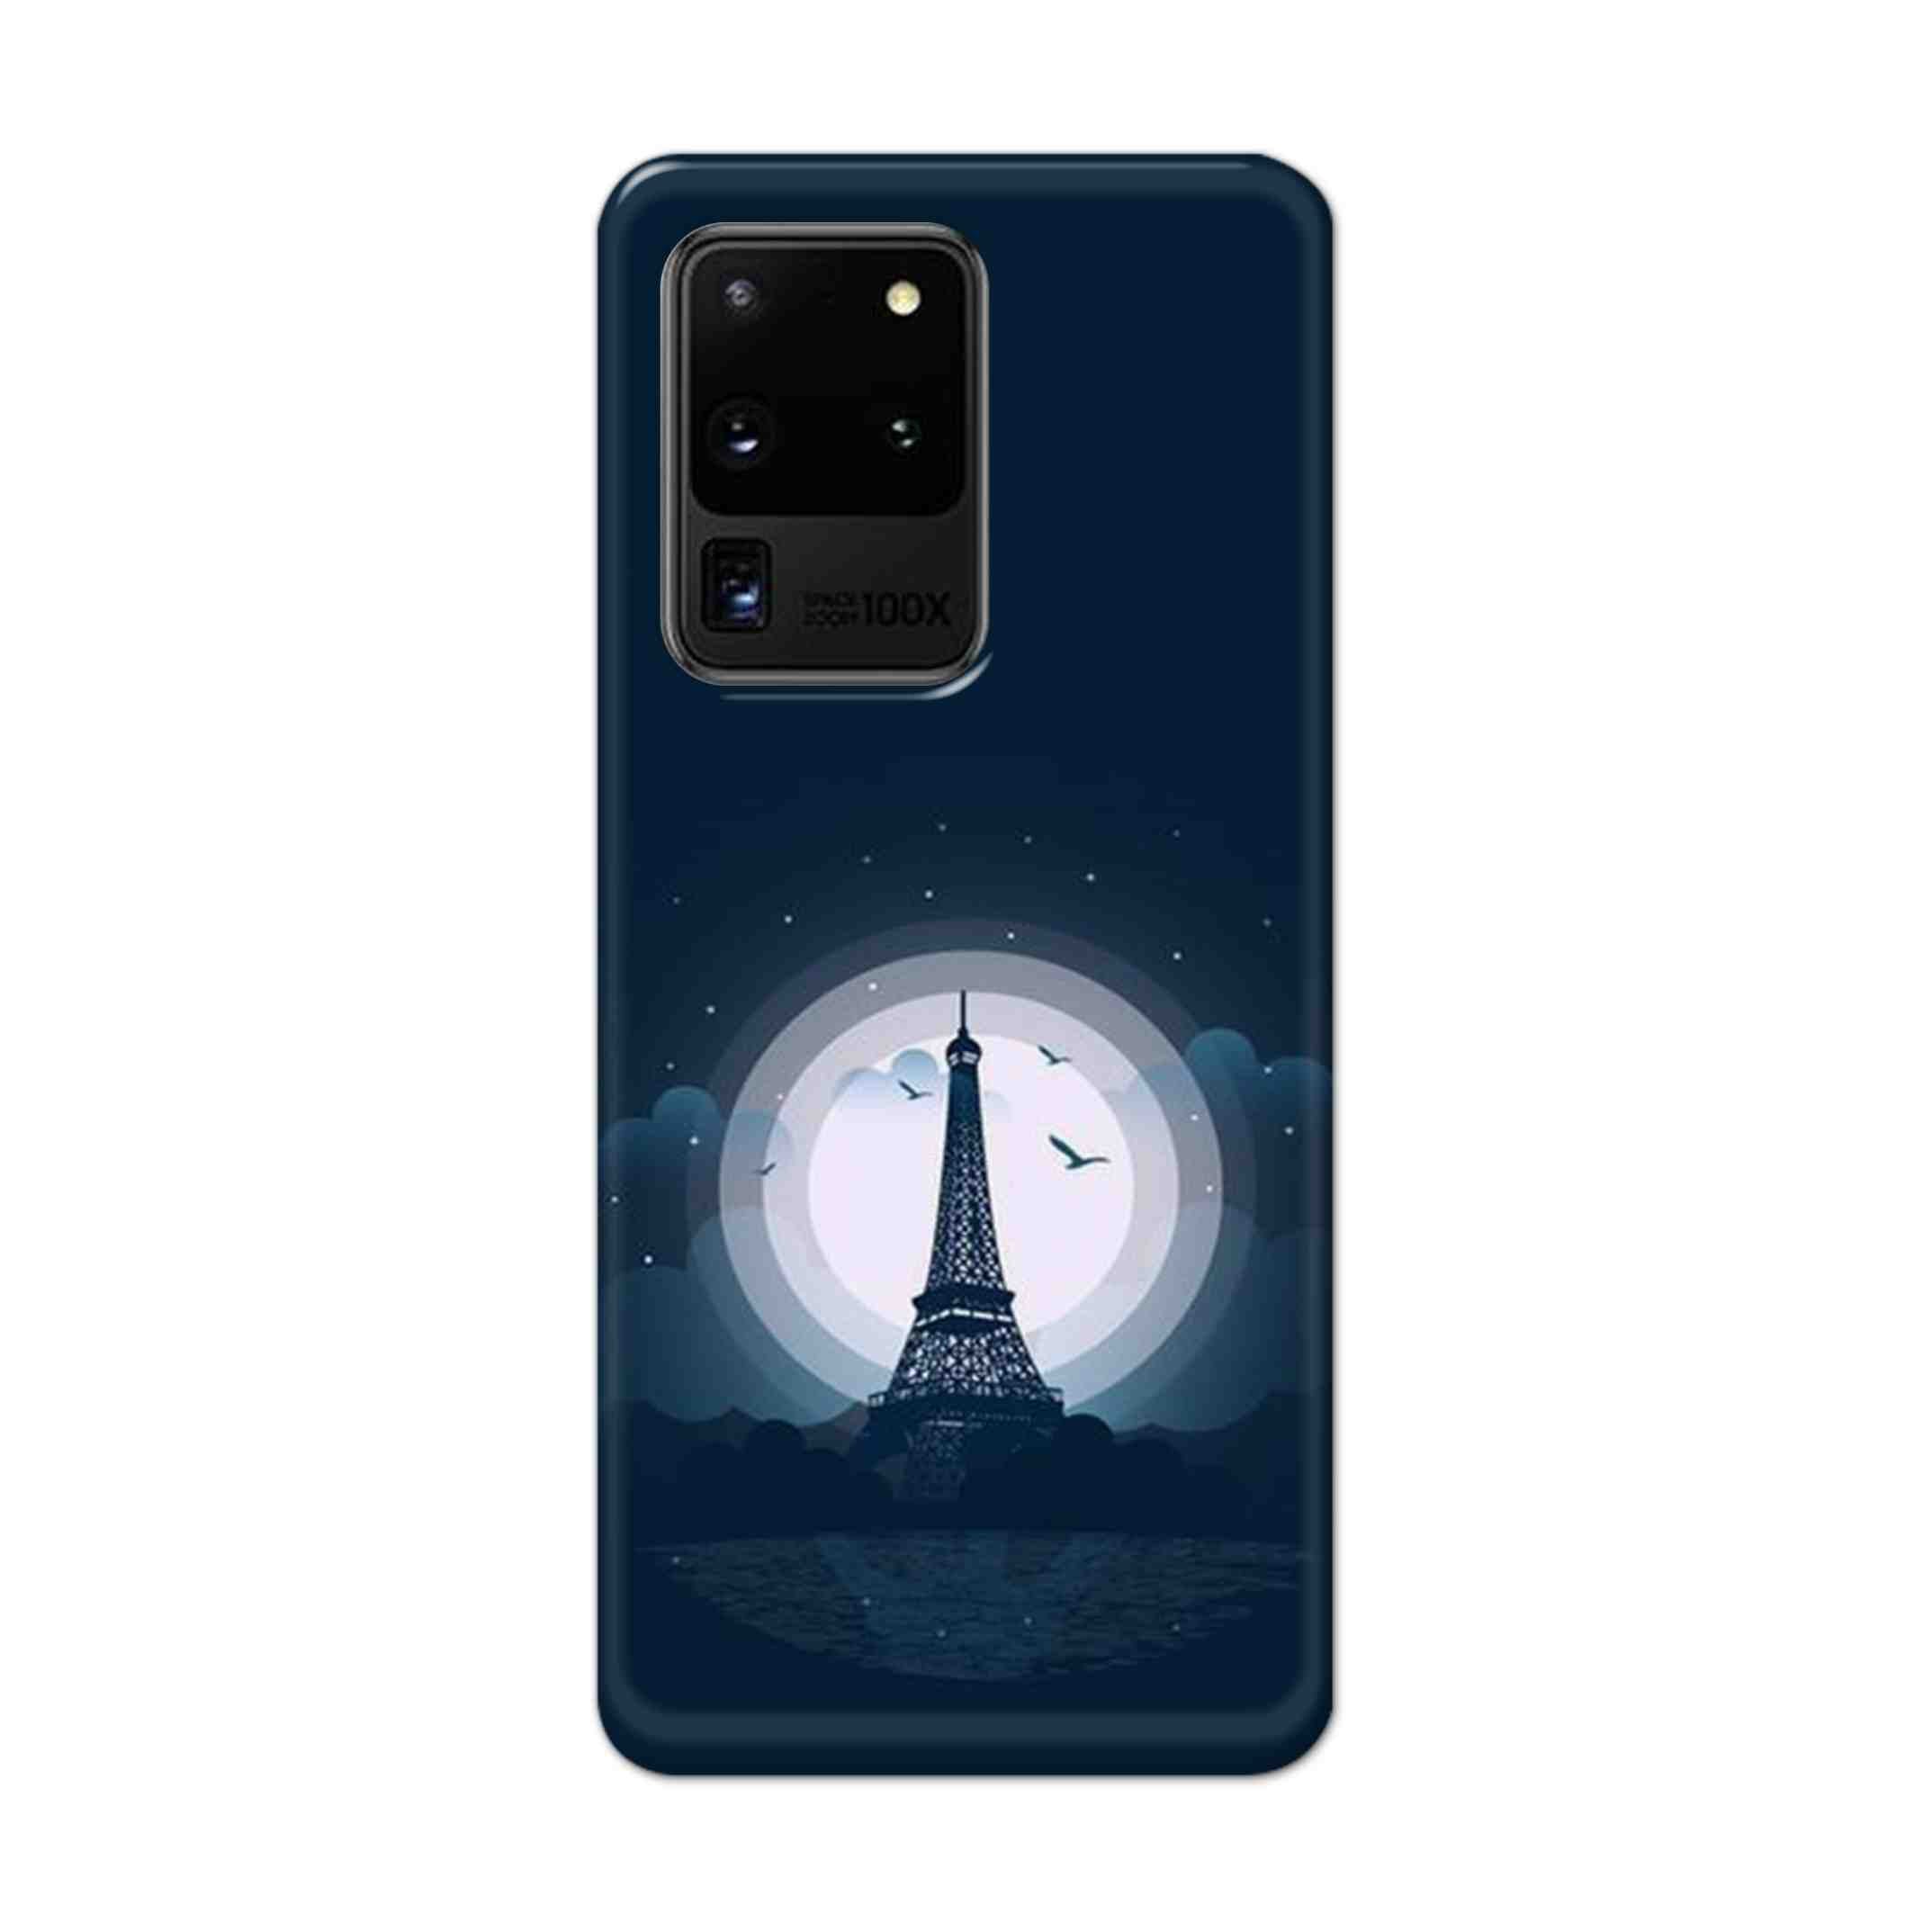 Buy Paris Eiffel Tower Hard Back Mobile Phone Case Cover For Samsung Galaxy S20 Ultra Online